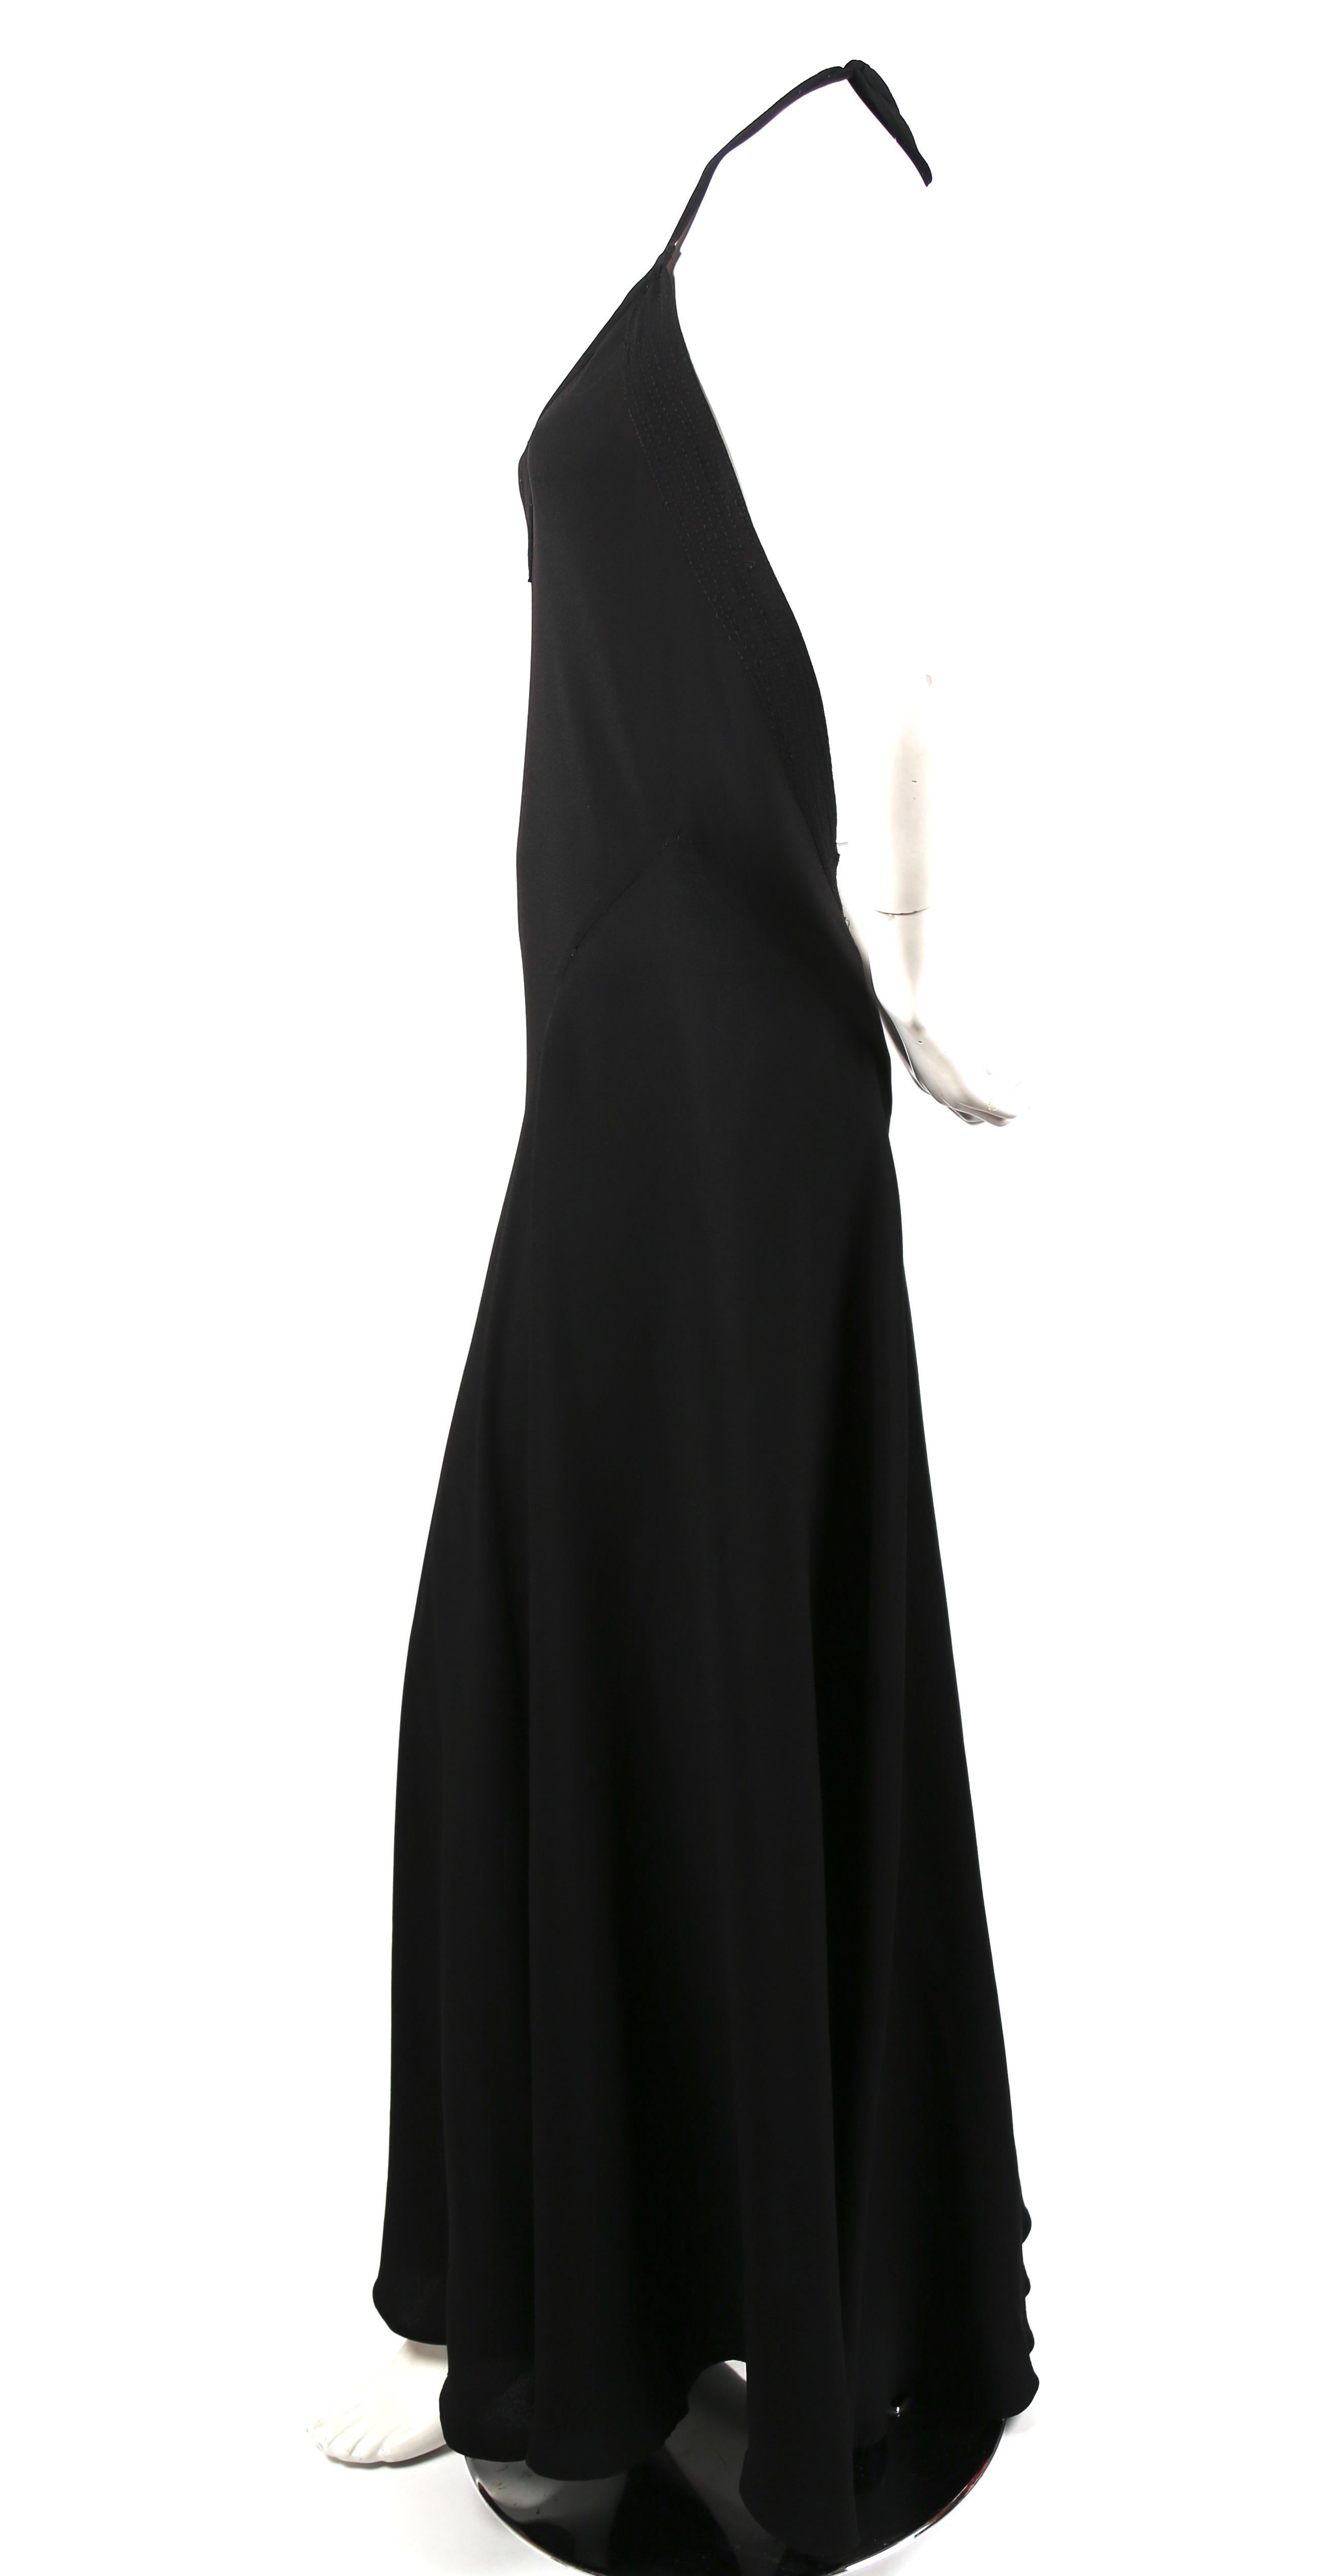 Jet-black, moss crepe, bias-cut maxi gown with deep-V front and back from Ossie Clark for Quorum as seen on Thandie Newton for the 